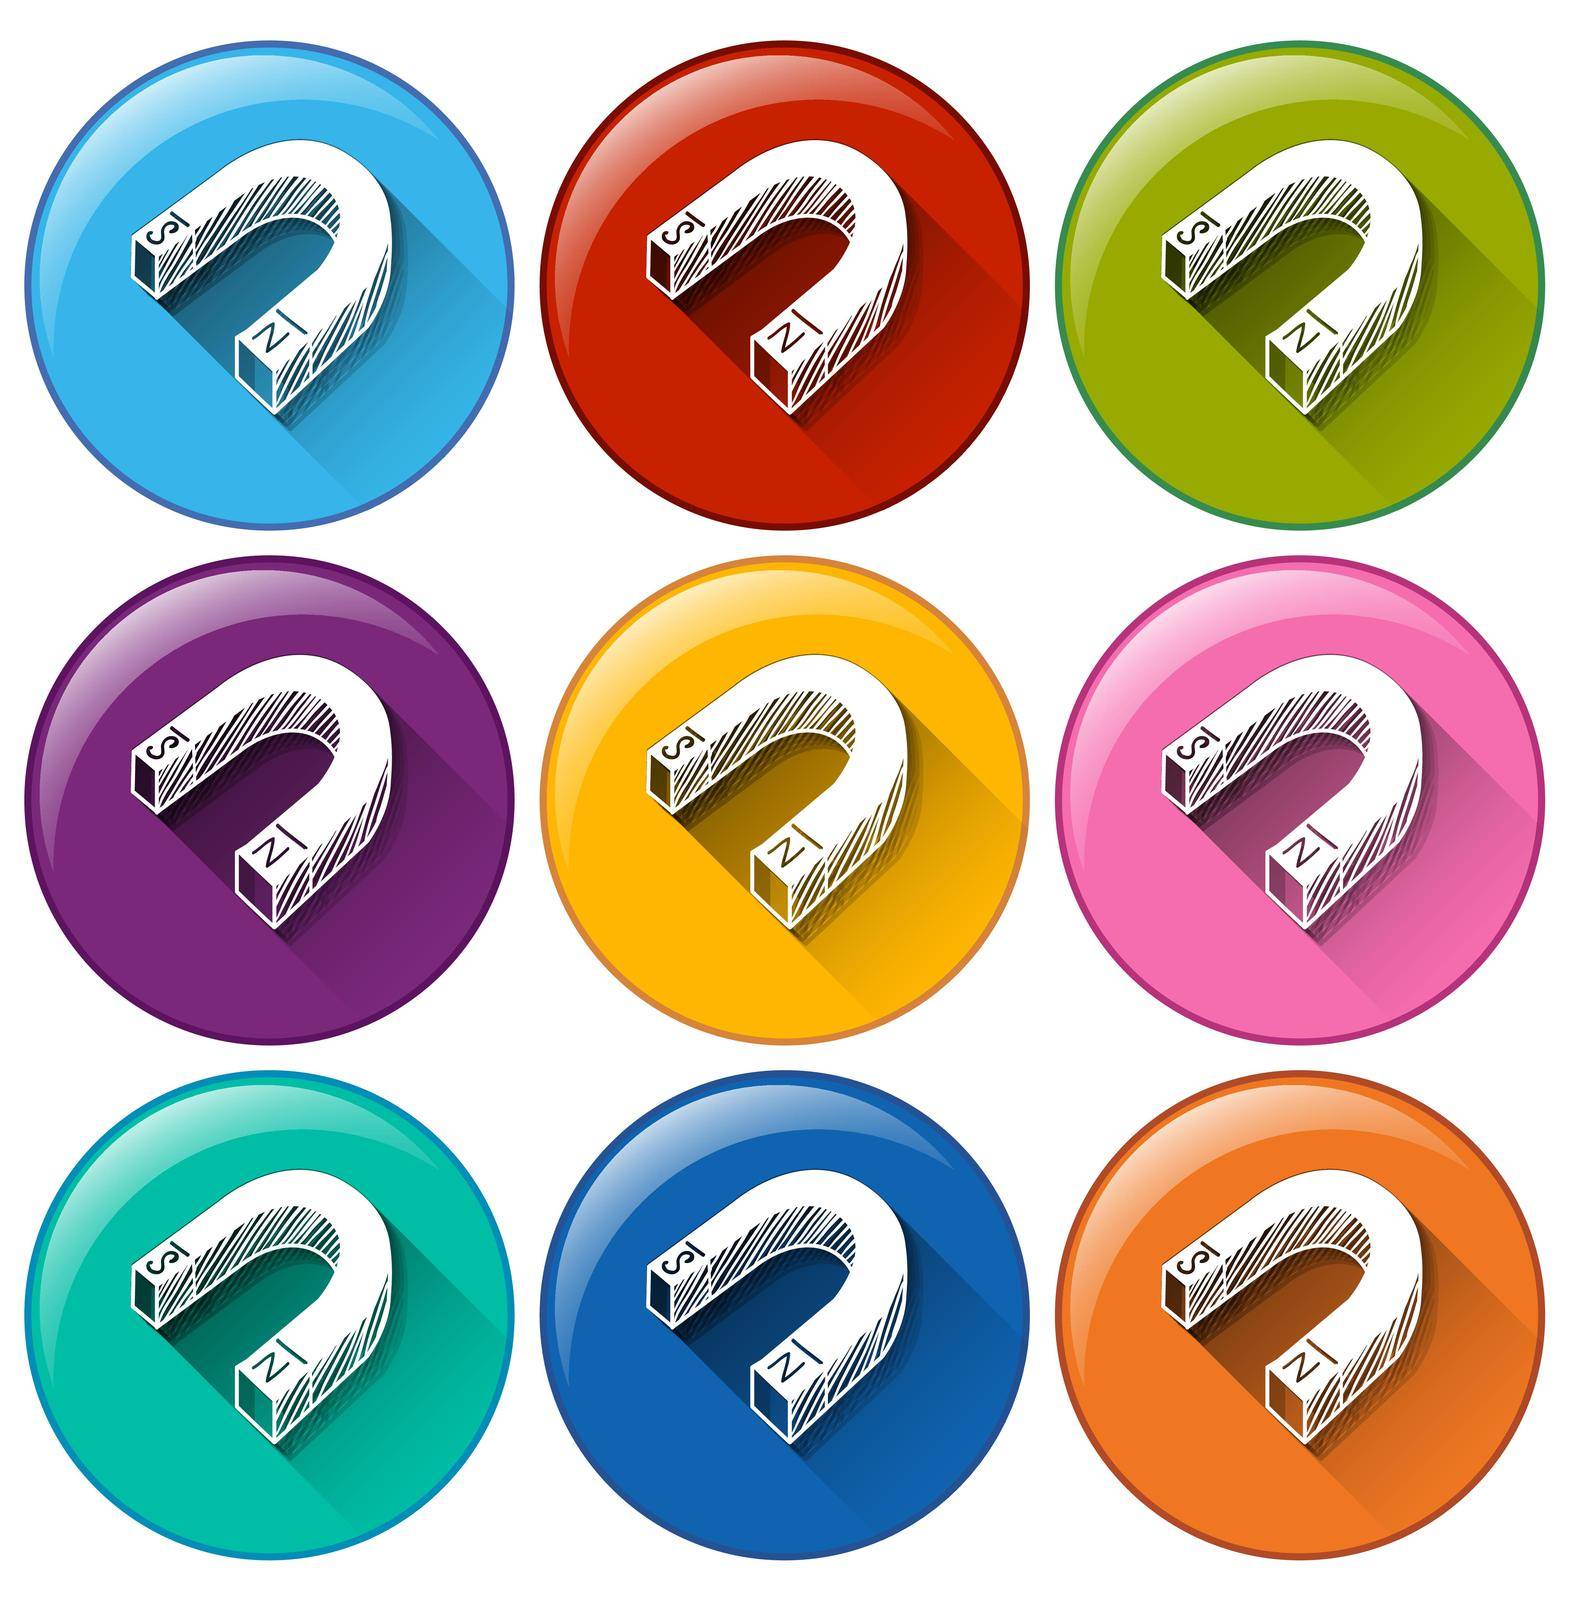 Magnet icons by iimages